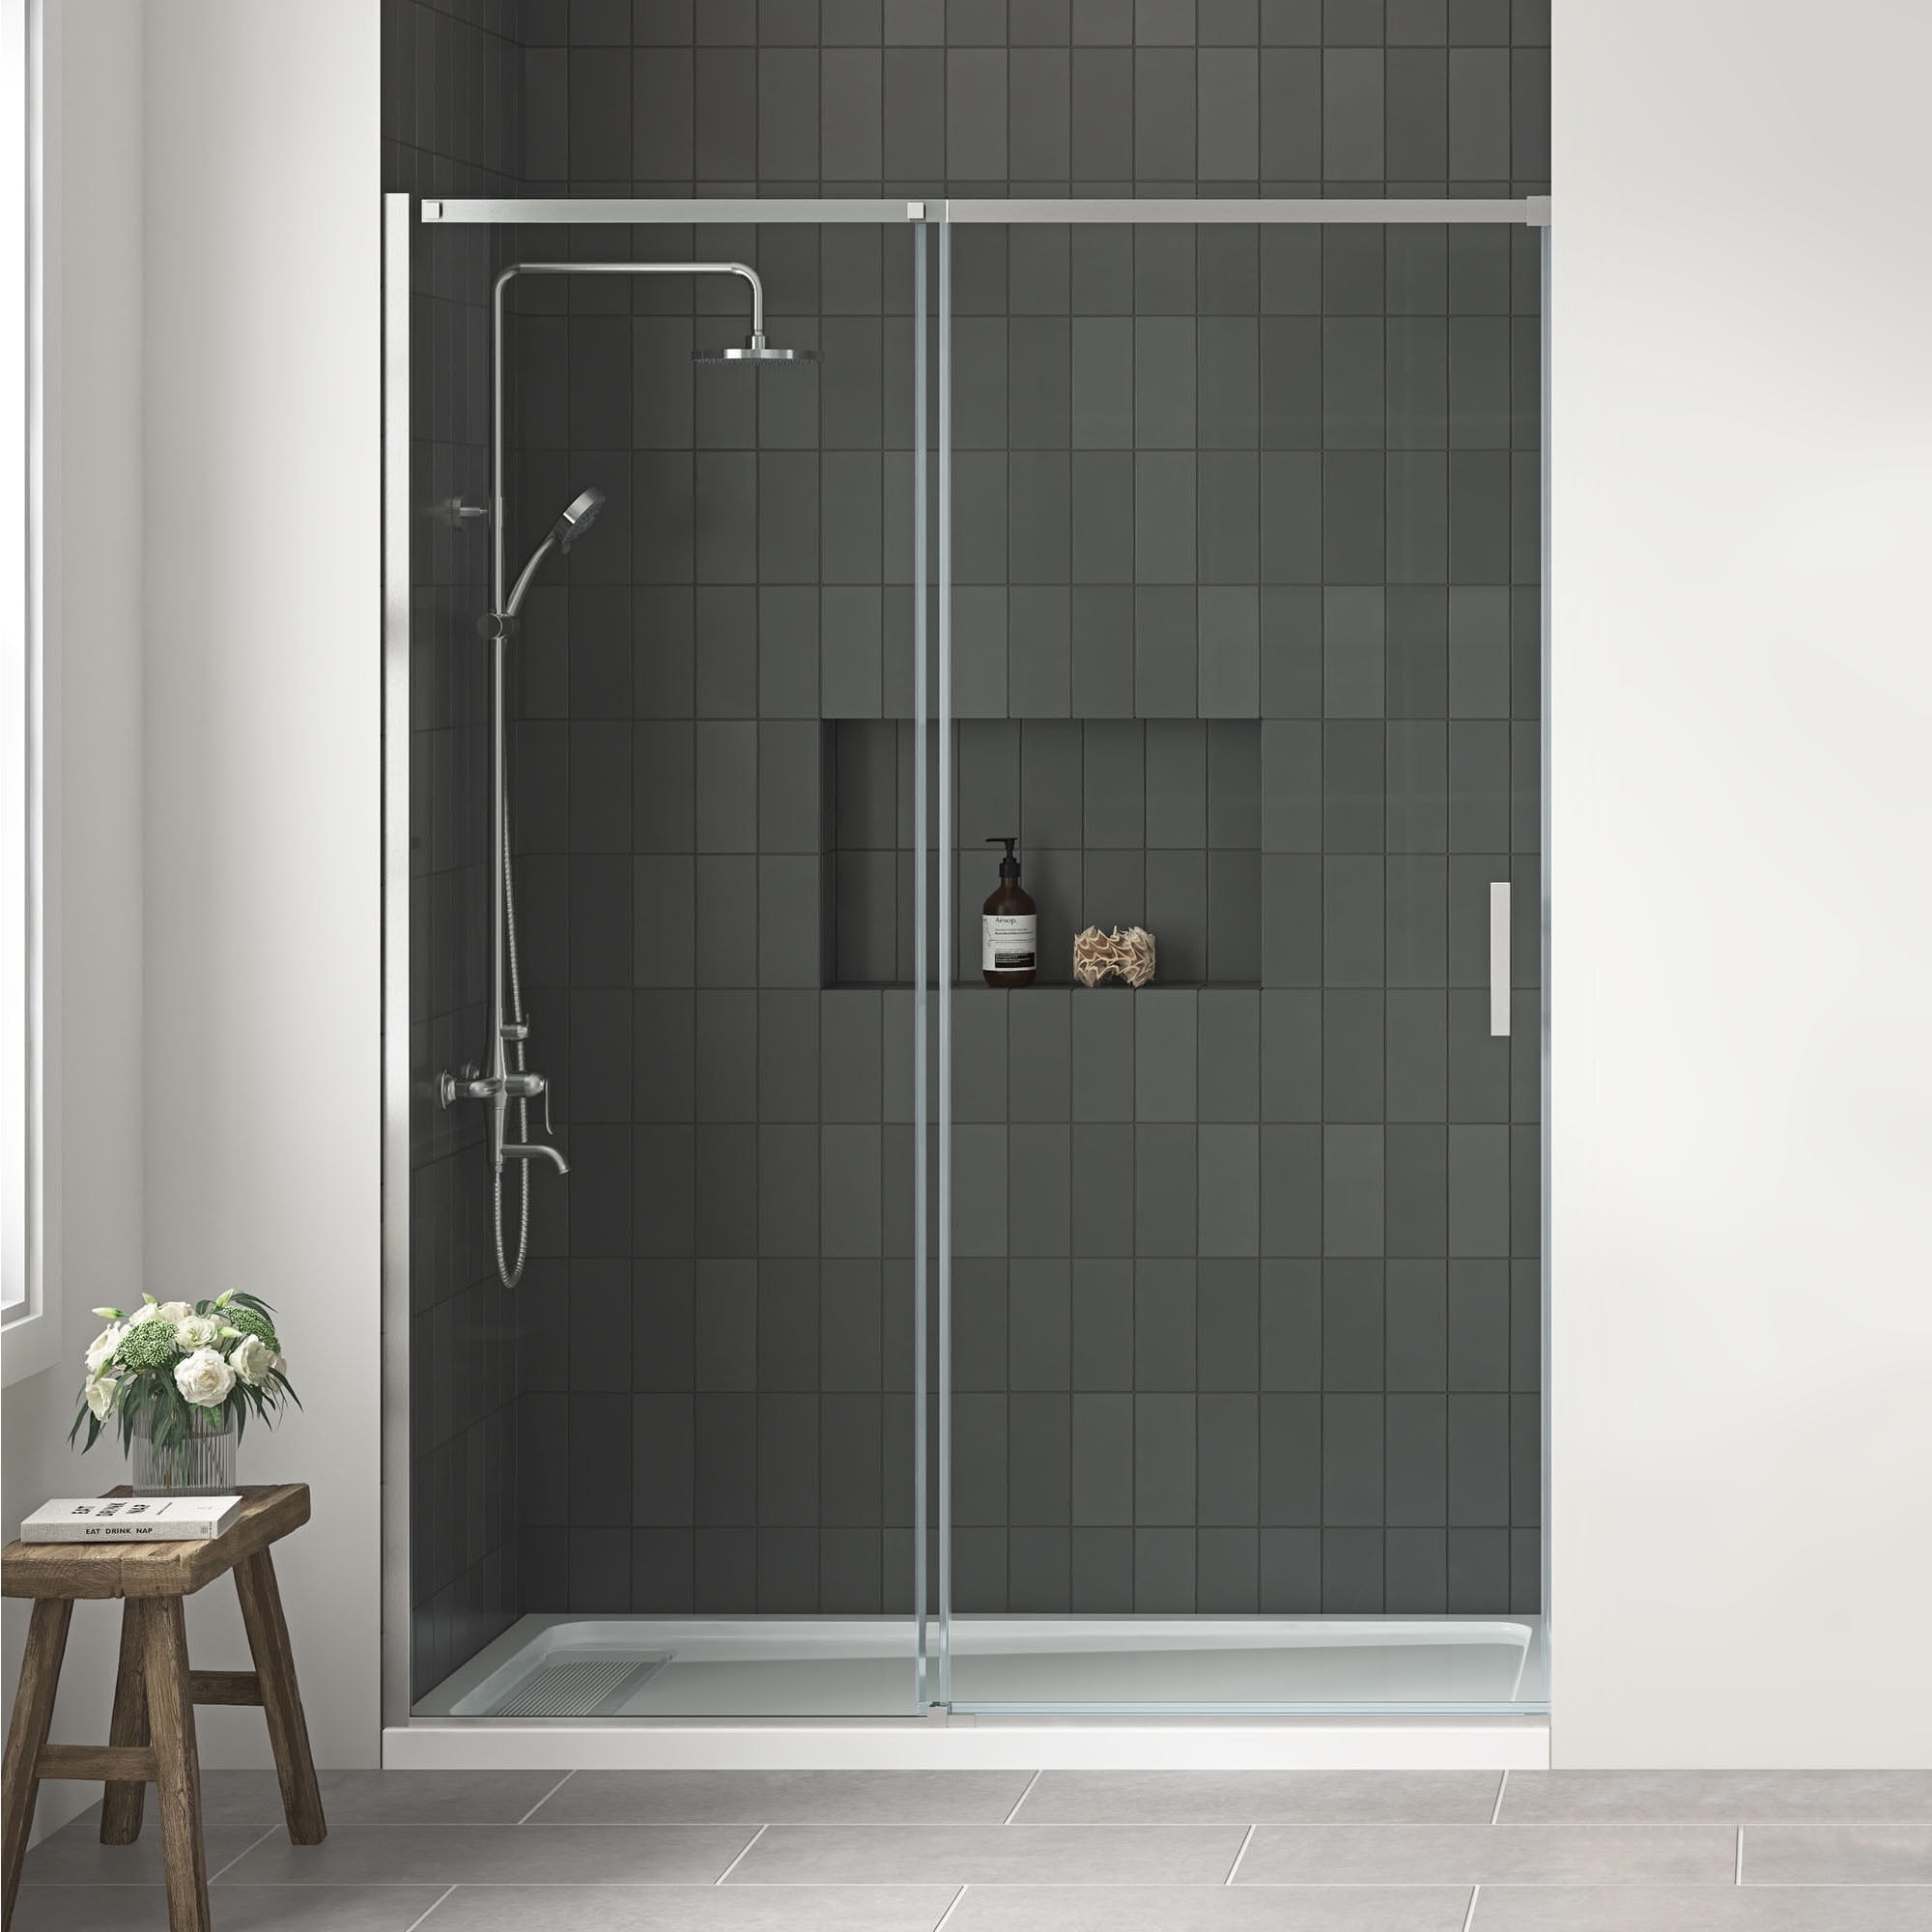 Ove Decors Tampa 92-13/16 in. W x 72 in. H Rectangular Pivot Frameless  Corner Shower Enclosure in Nickel with Buttress Panels